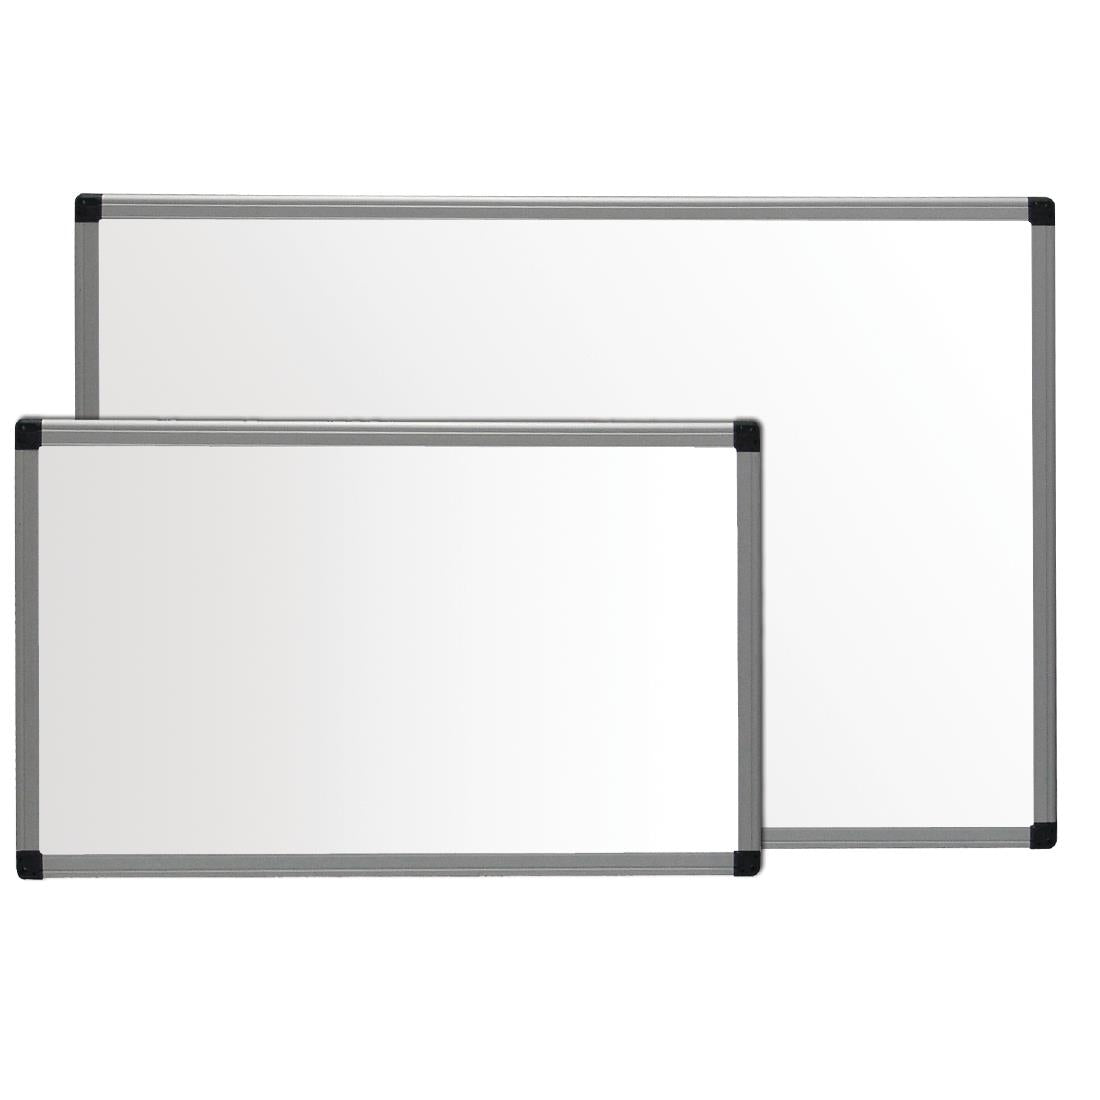 GG046 Olympia White Magnetic Board JD Catering Equipment Solutions Ltd